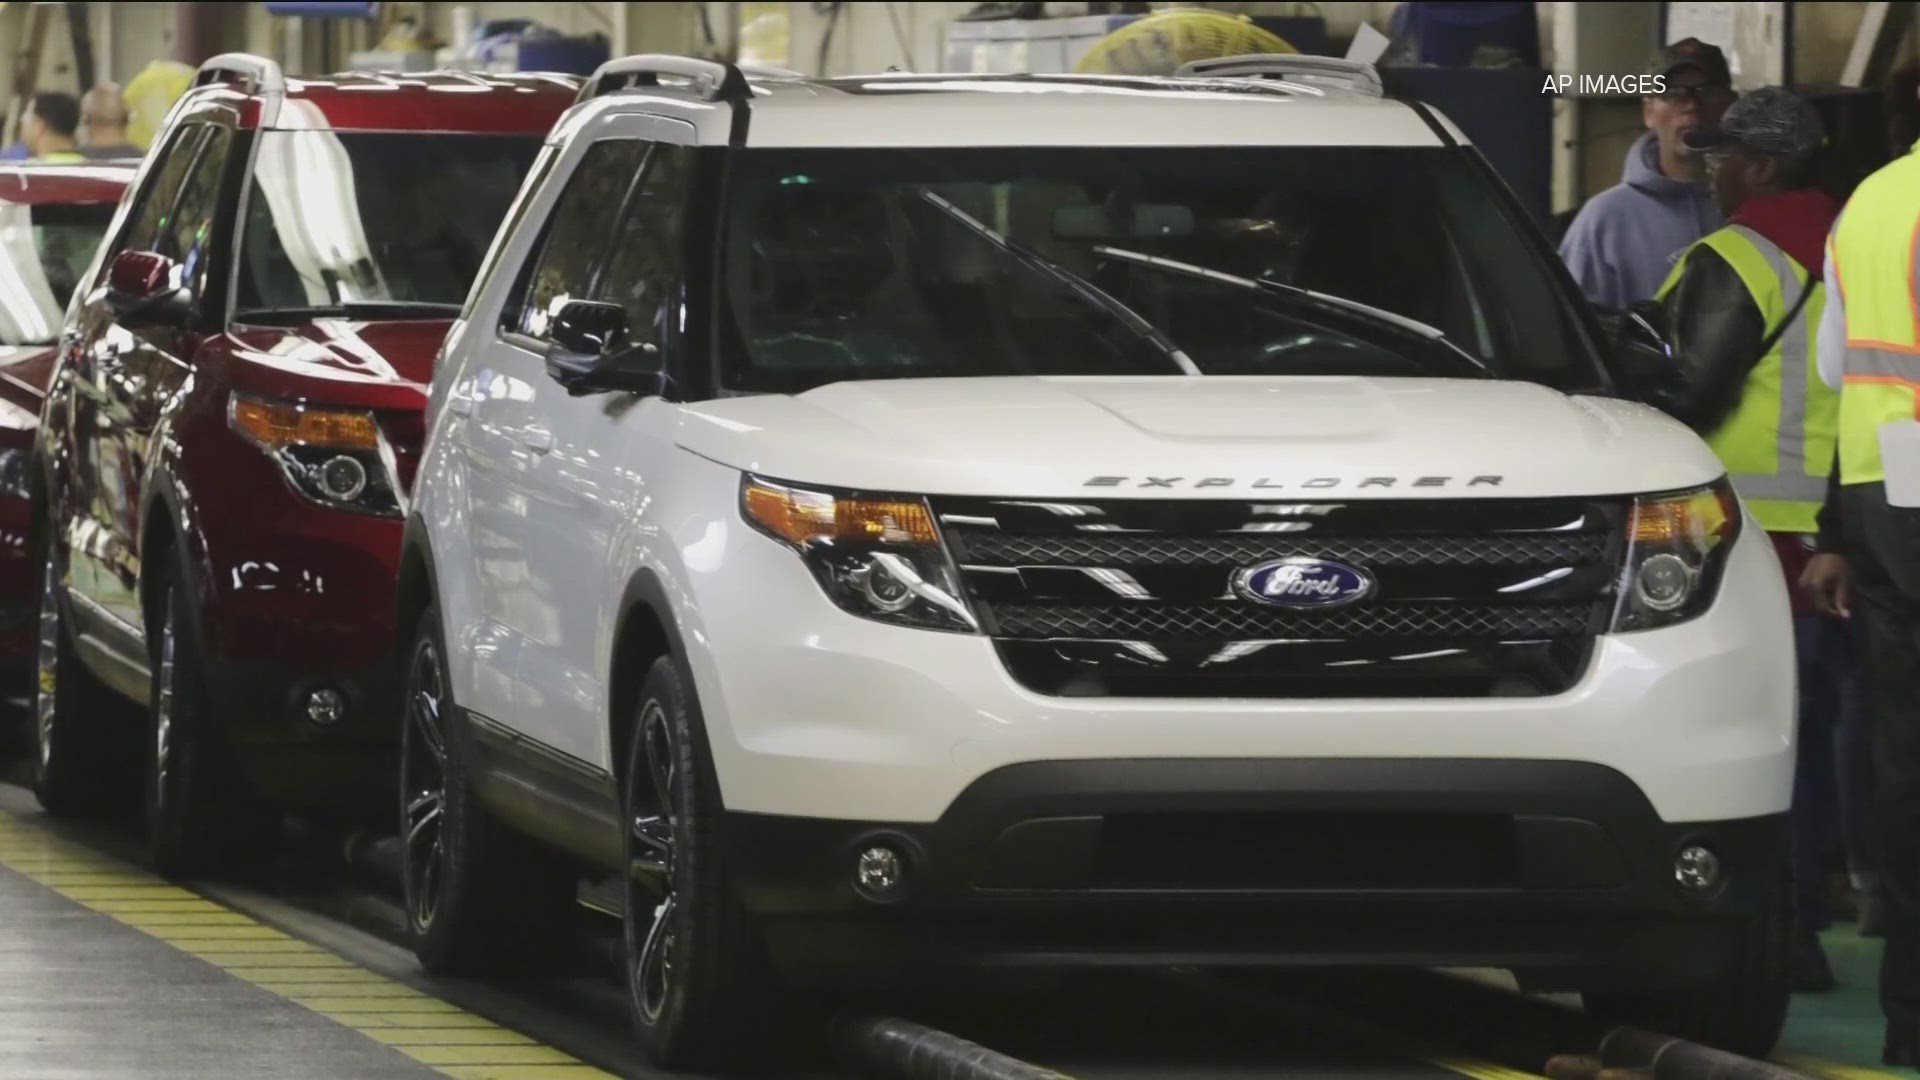 Ford said it expects only 5% of the recalled Explorers to be affected by the problem.